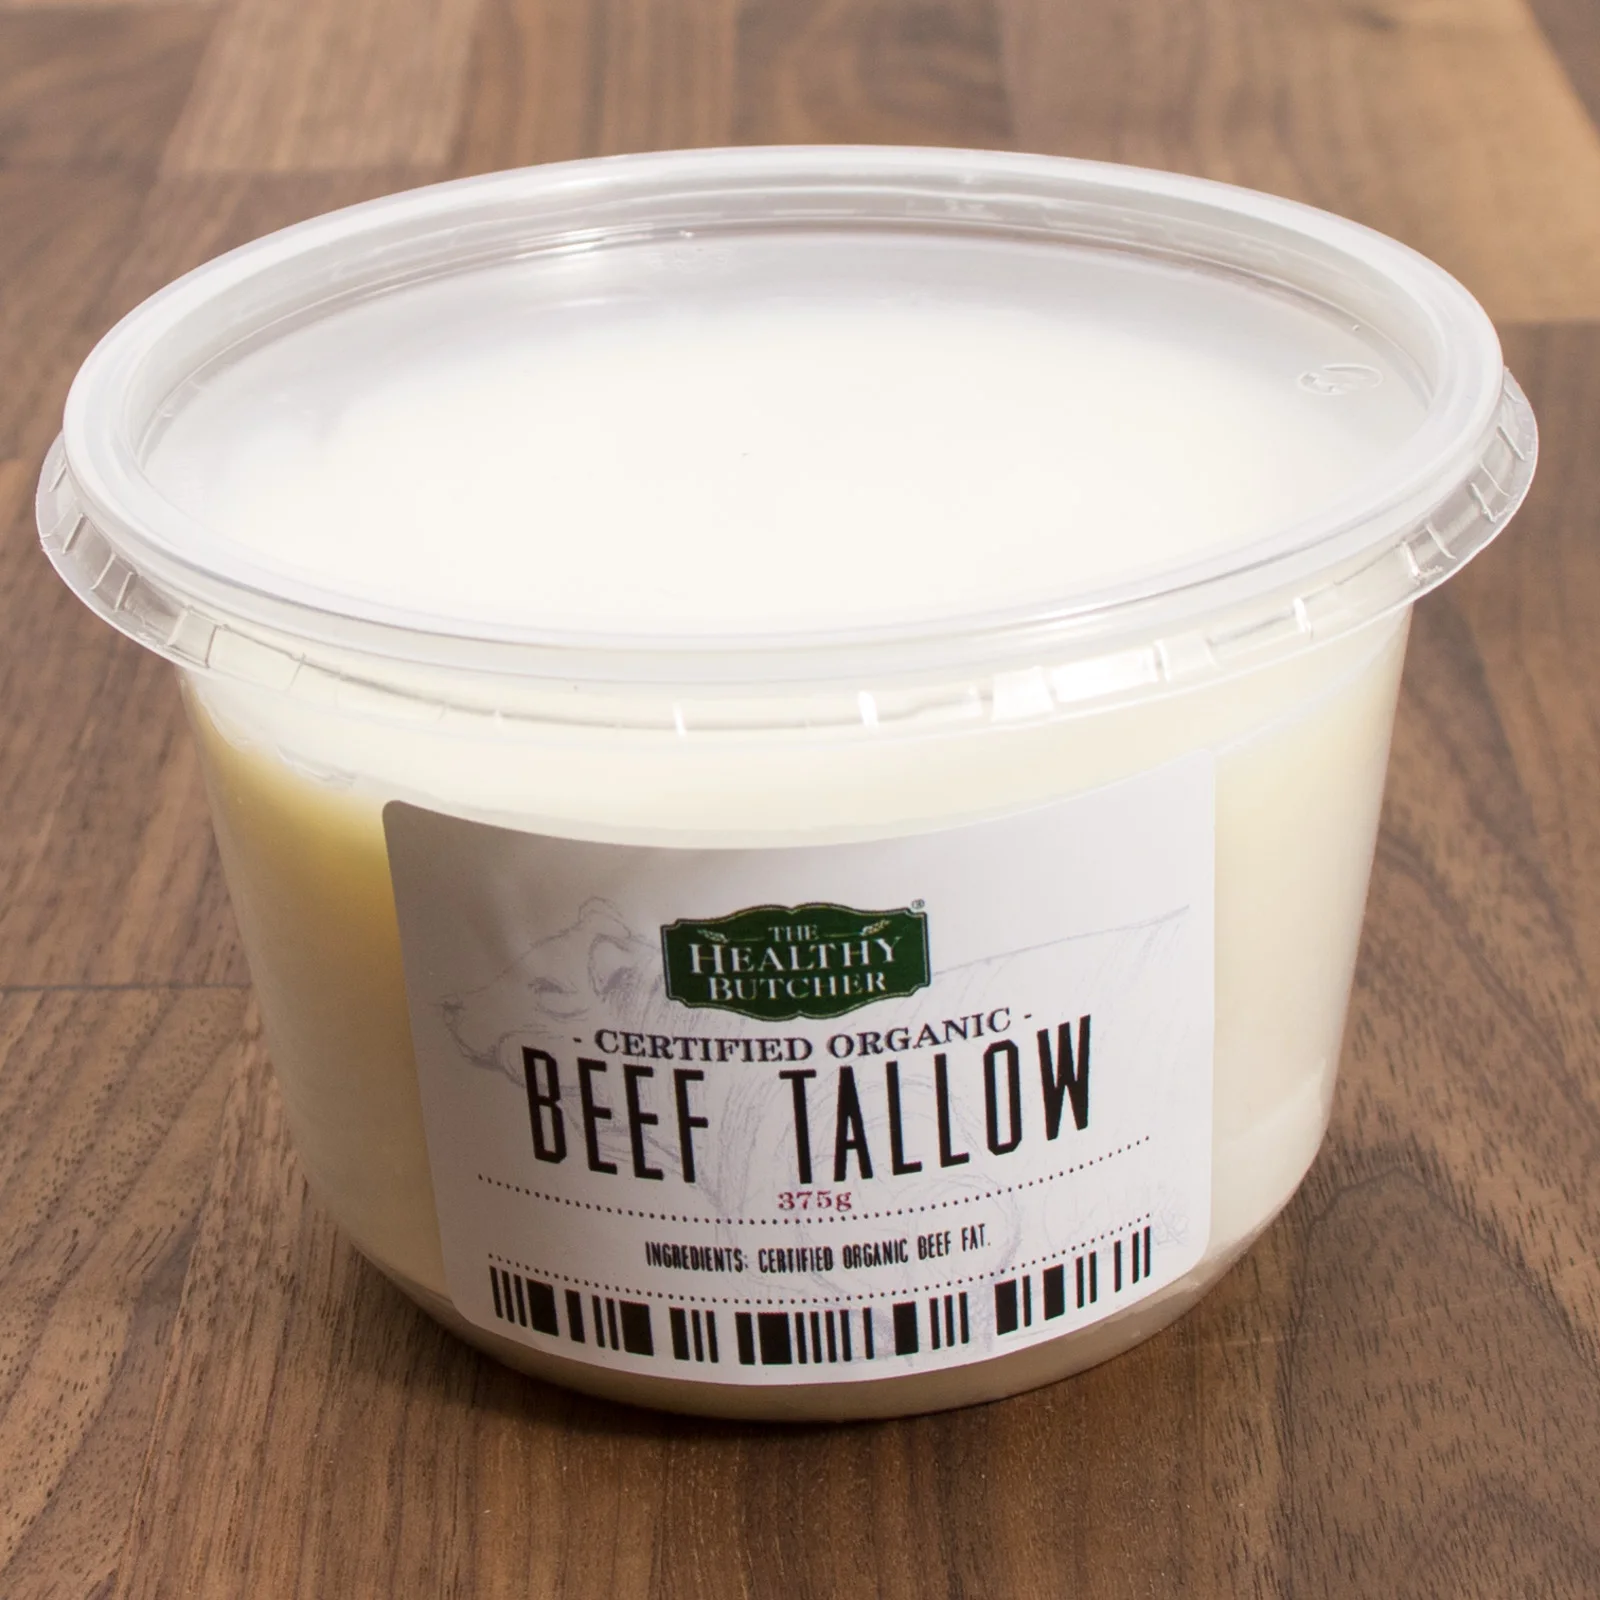 100 Pure Beef Tallow Fat Edible And Inedible Beef Tallow For Sale Buy Beef Tallow For Sale Beef Tallow Oil Animal Tallow Product On Alibaba Com